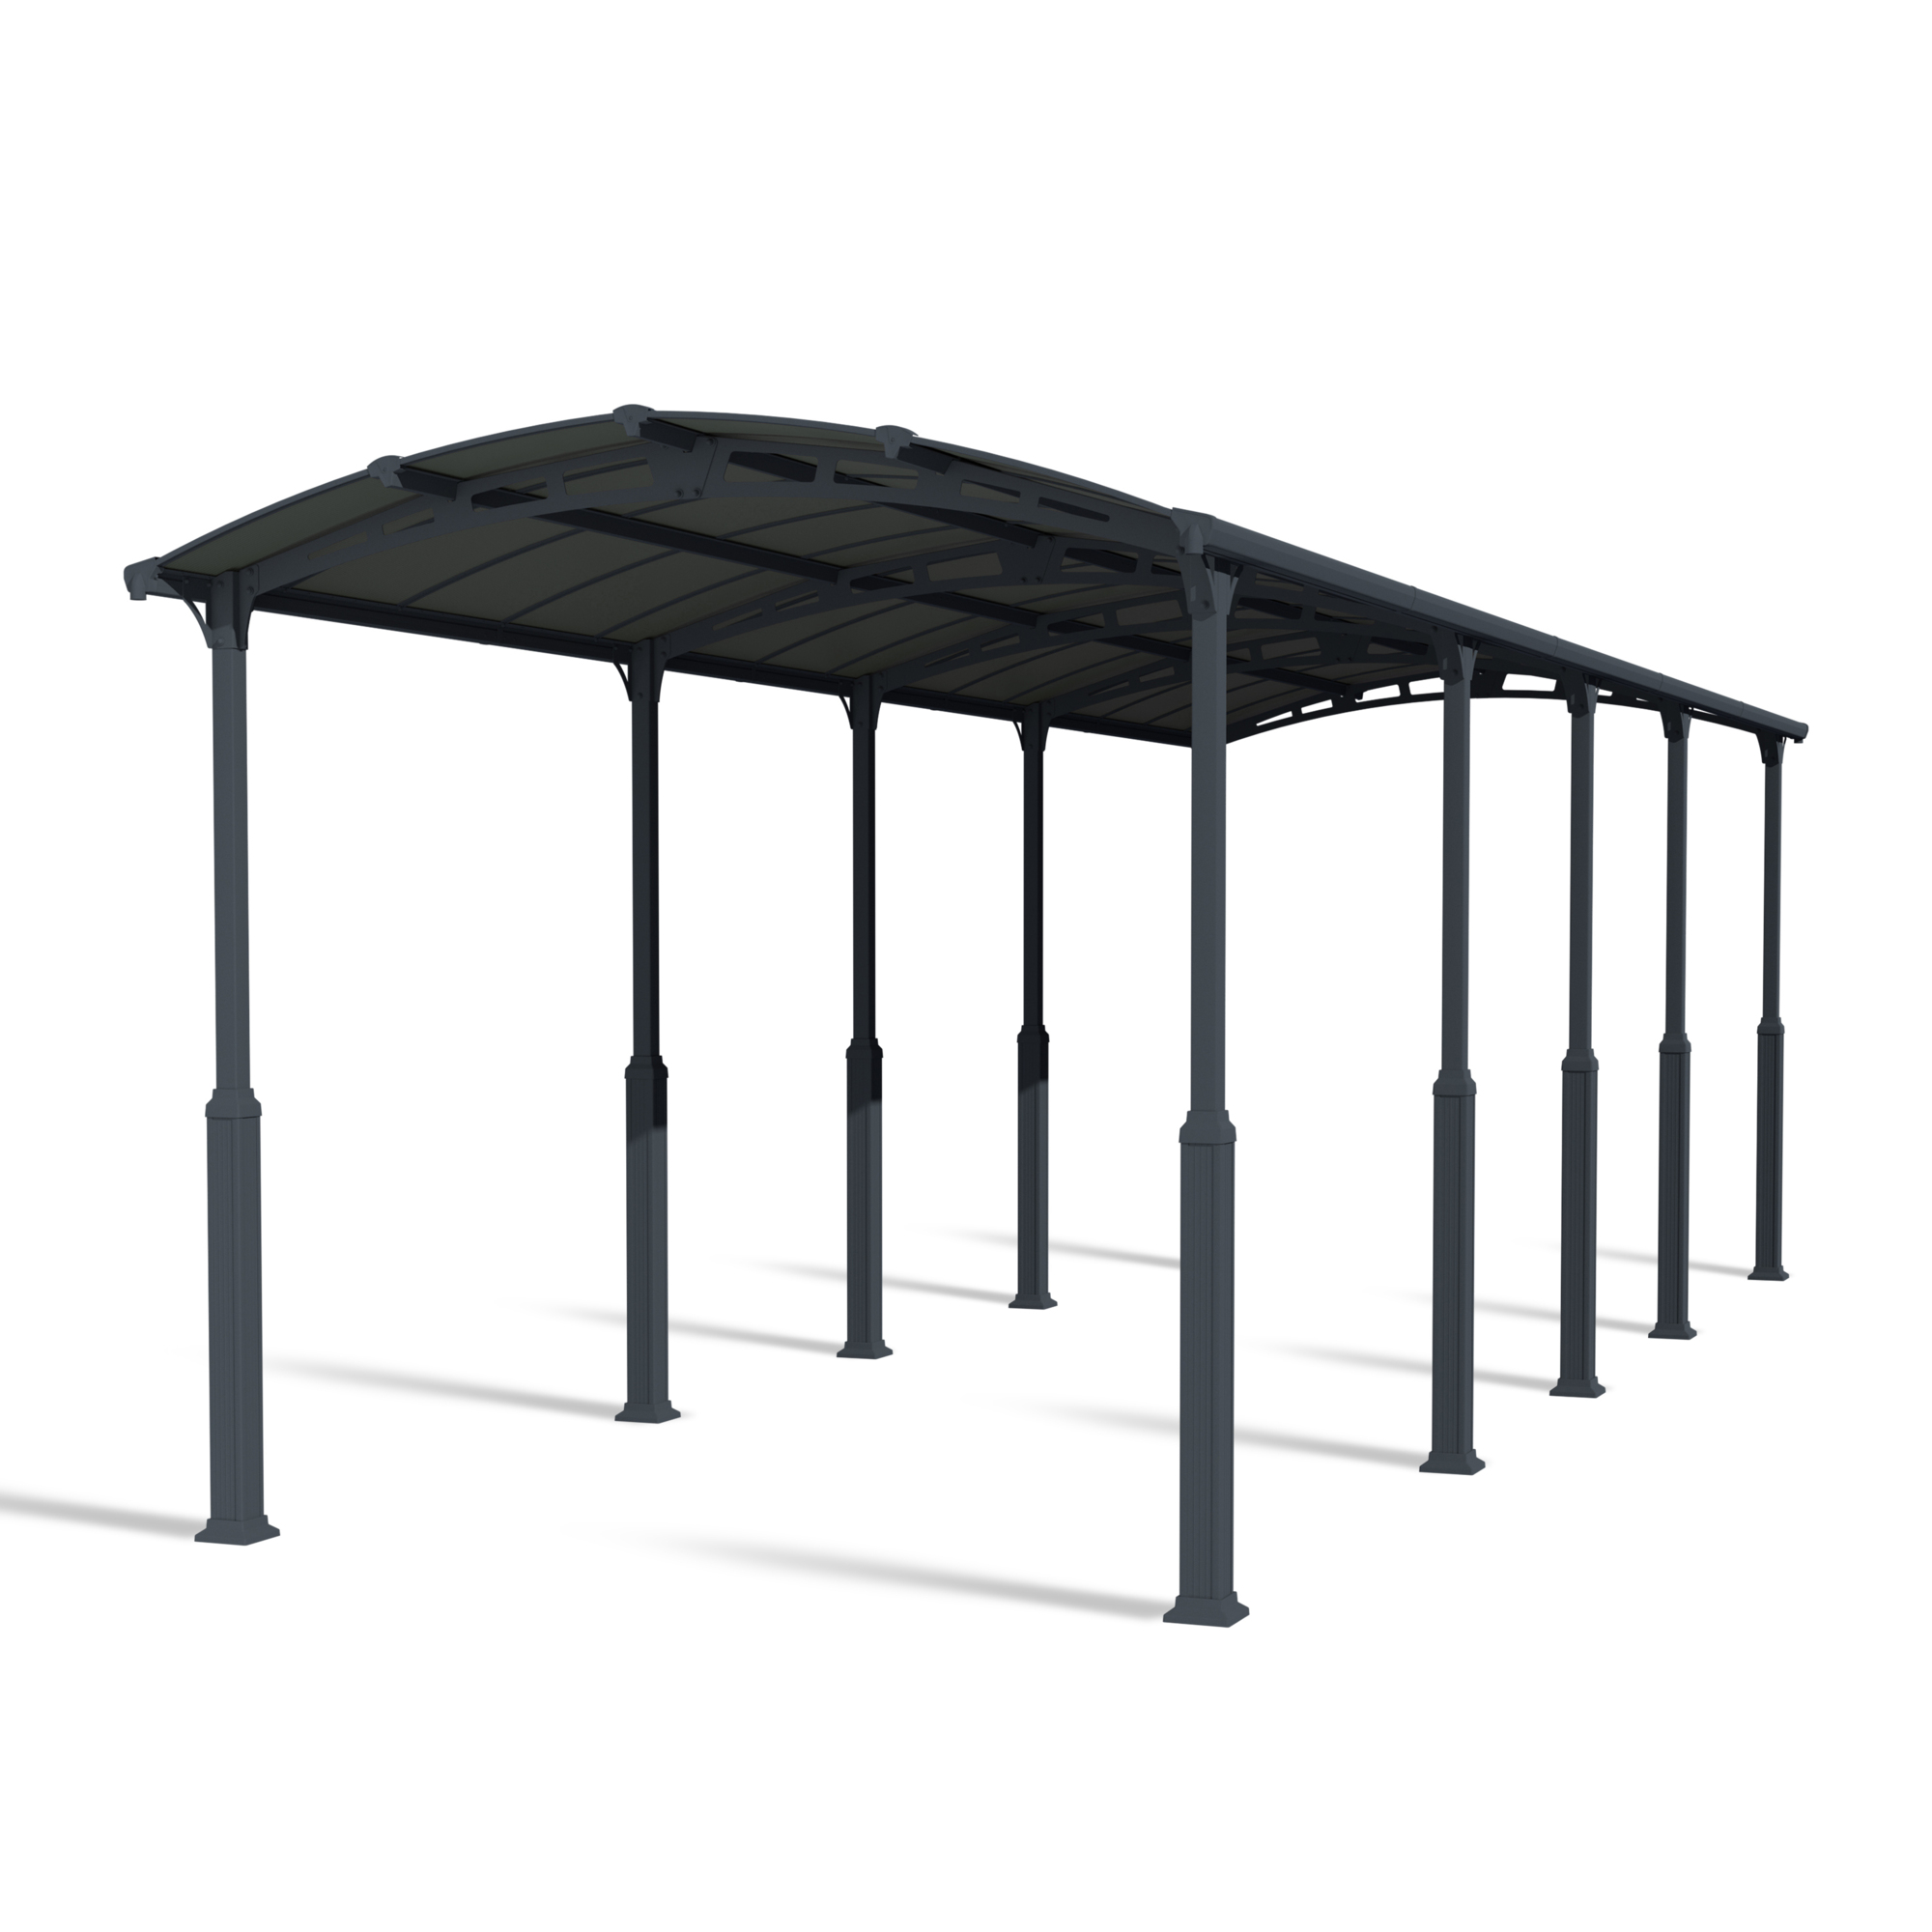 Poly-Tex Inc., Palram - Canopia Arcadia Alpine 12ft. x 35ft. Carport, Width 89 in, Height 59.5 in, Cover Material Polycarbonate, Model 705916